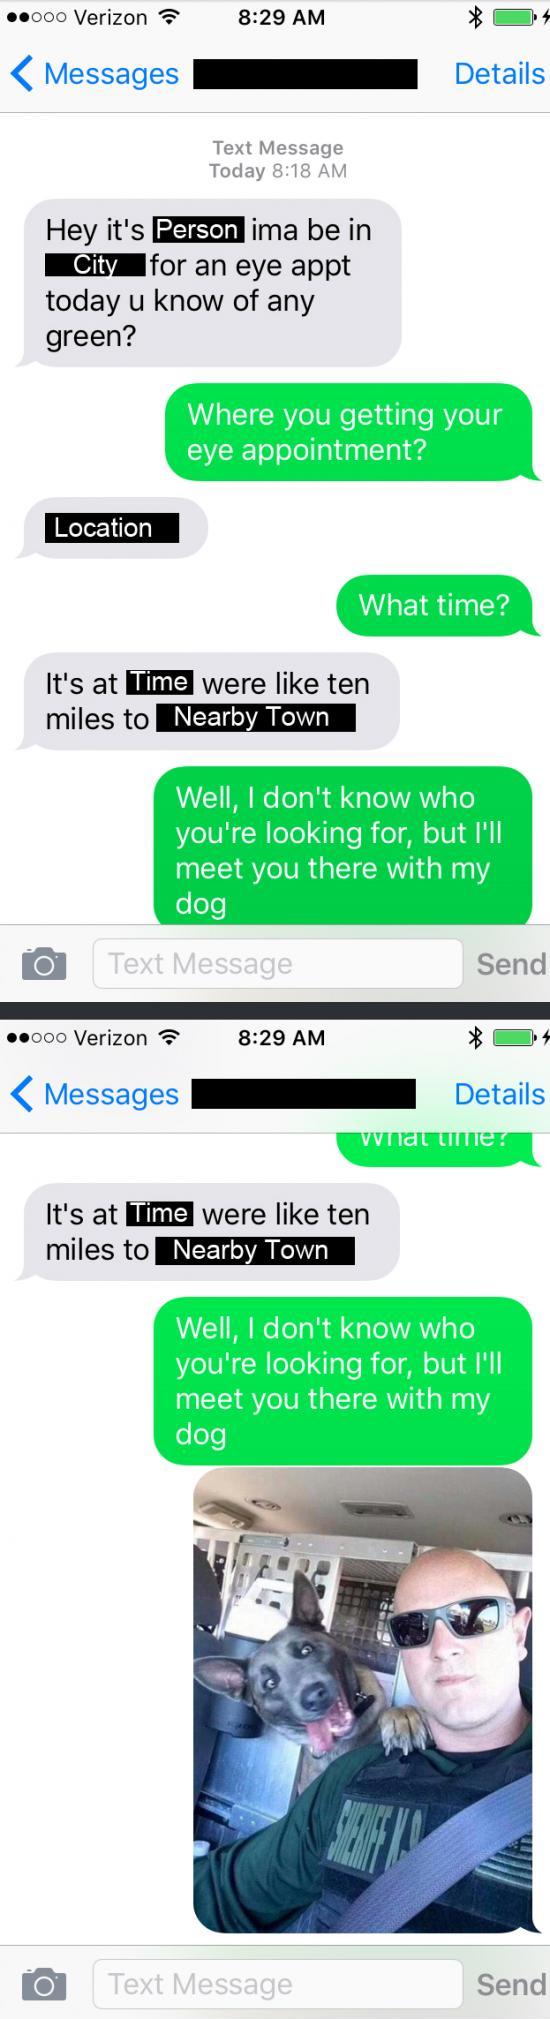 You got the wrong number, buddy…